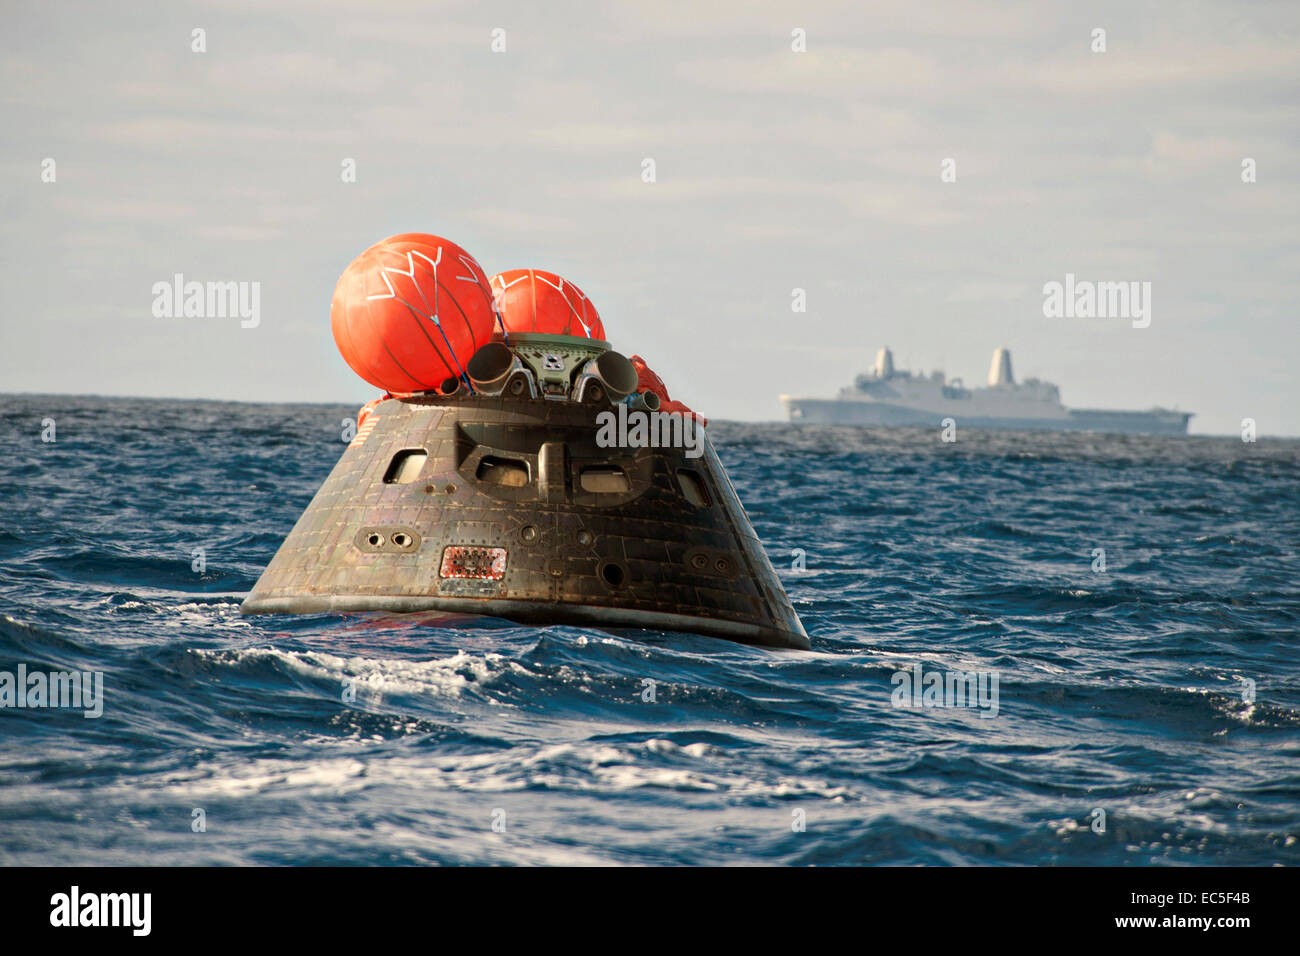 US Navy sailors from the amphibious transport dock ship USS Anchorage recover the NASA Orion space capsule during the second at-sea testing for the crew module using a well deck recovery August 3, 2014 off the coast of California. Stock Photo